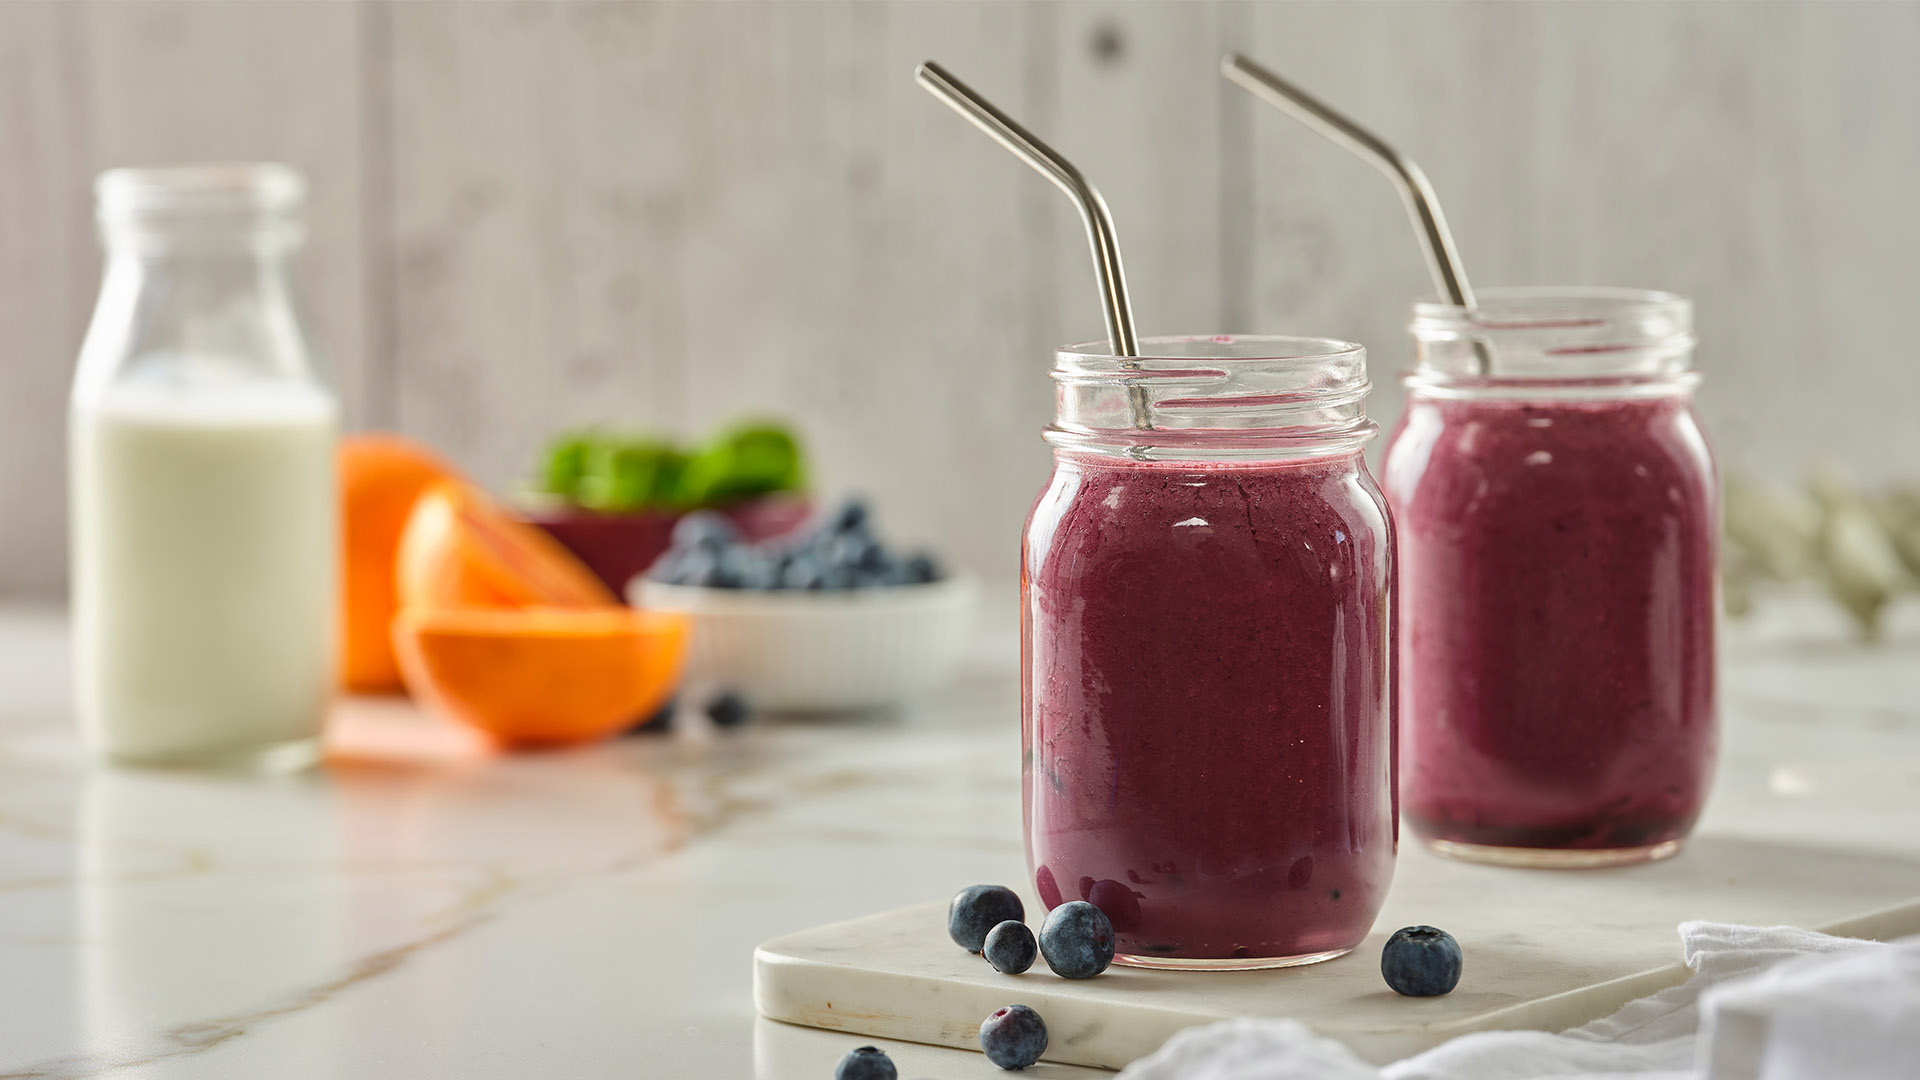 Side shot of two jars with metal straws containing blueberry kefir smoothie with pitcher of milk and small bowls with smoothie ingredients in them in the background.